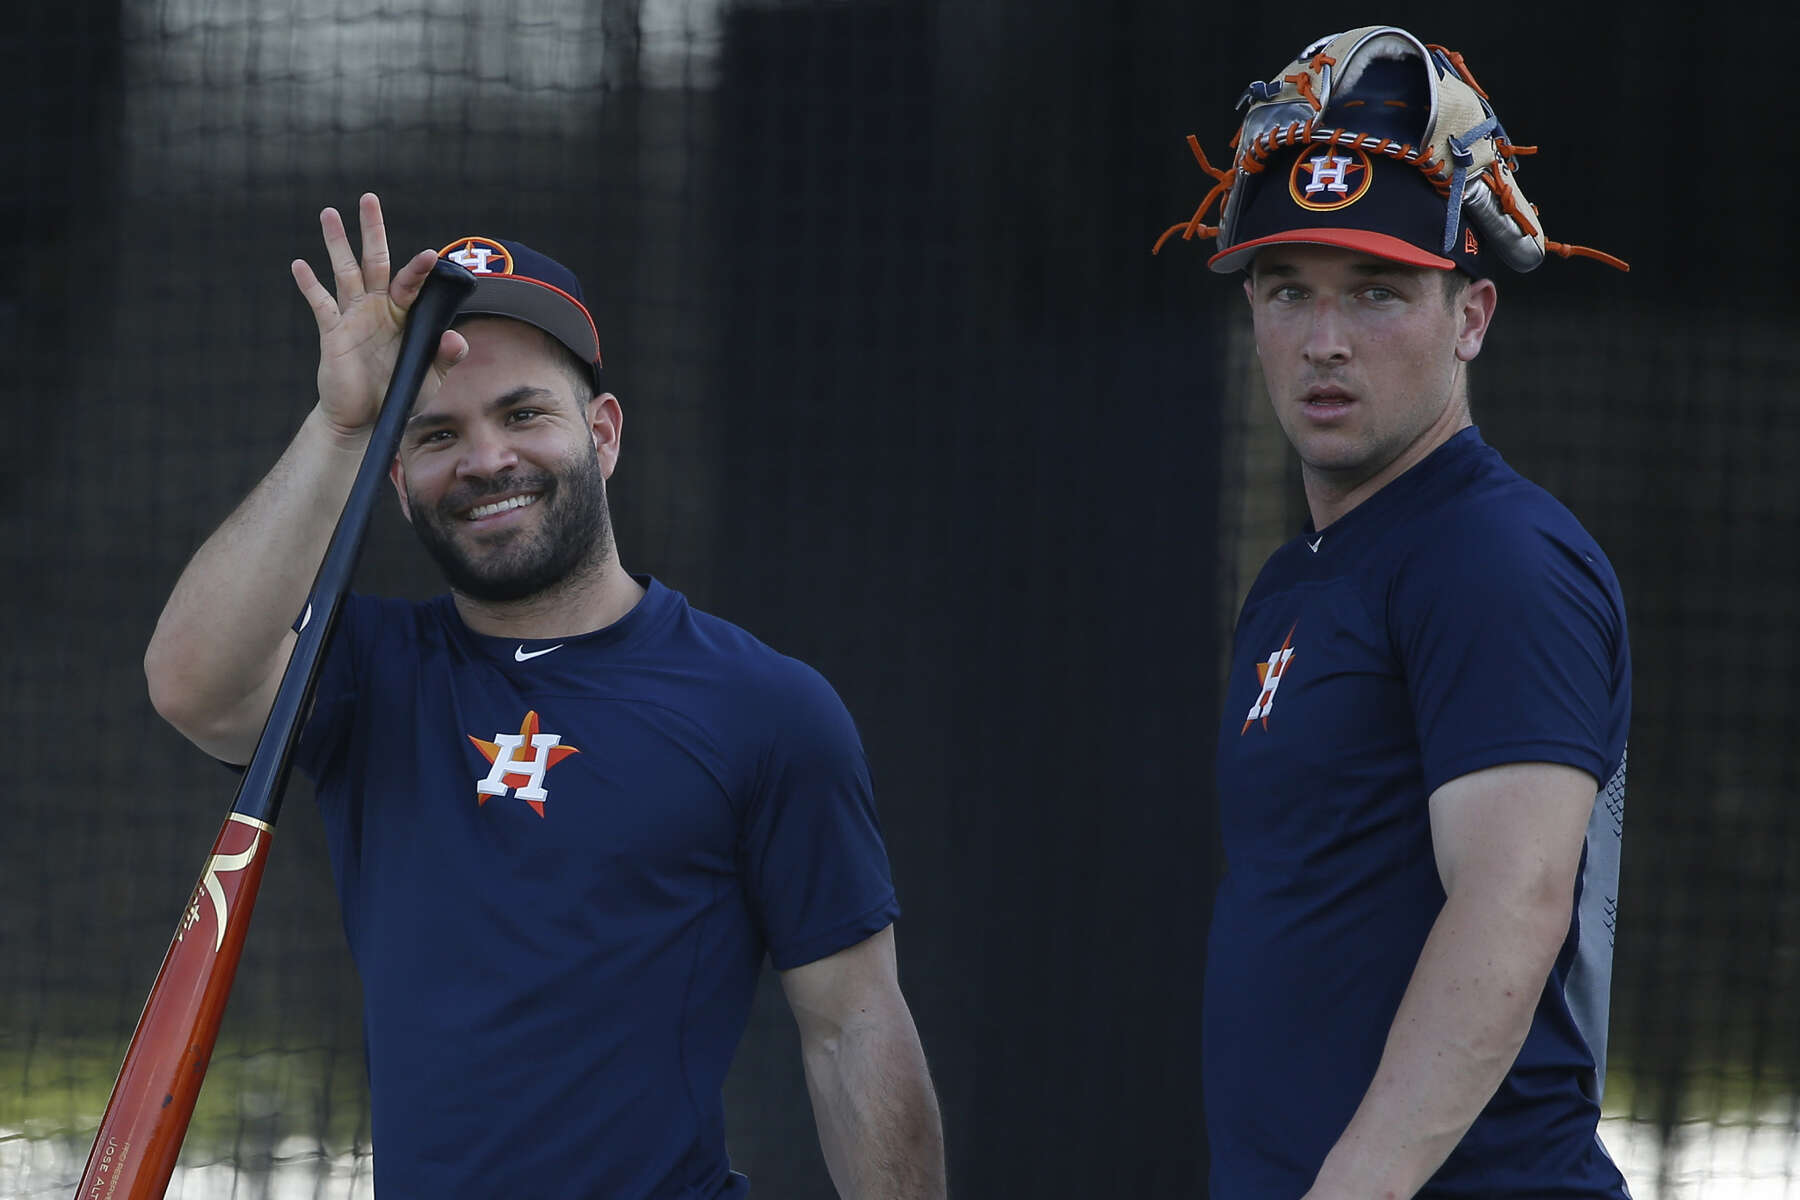 It hurts to watch, but Astros' Lance McCullers Jr. focuses on big picture